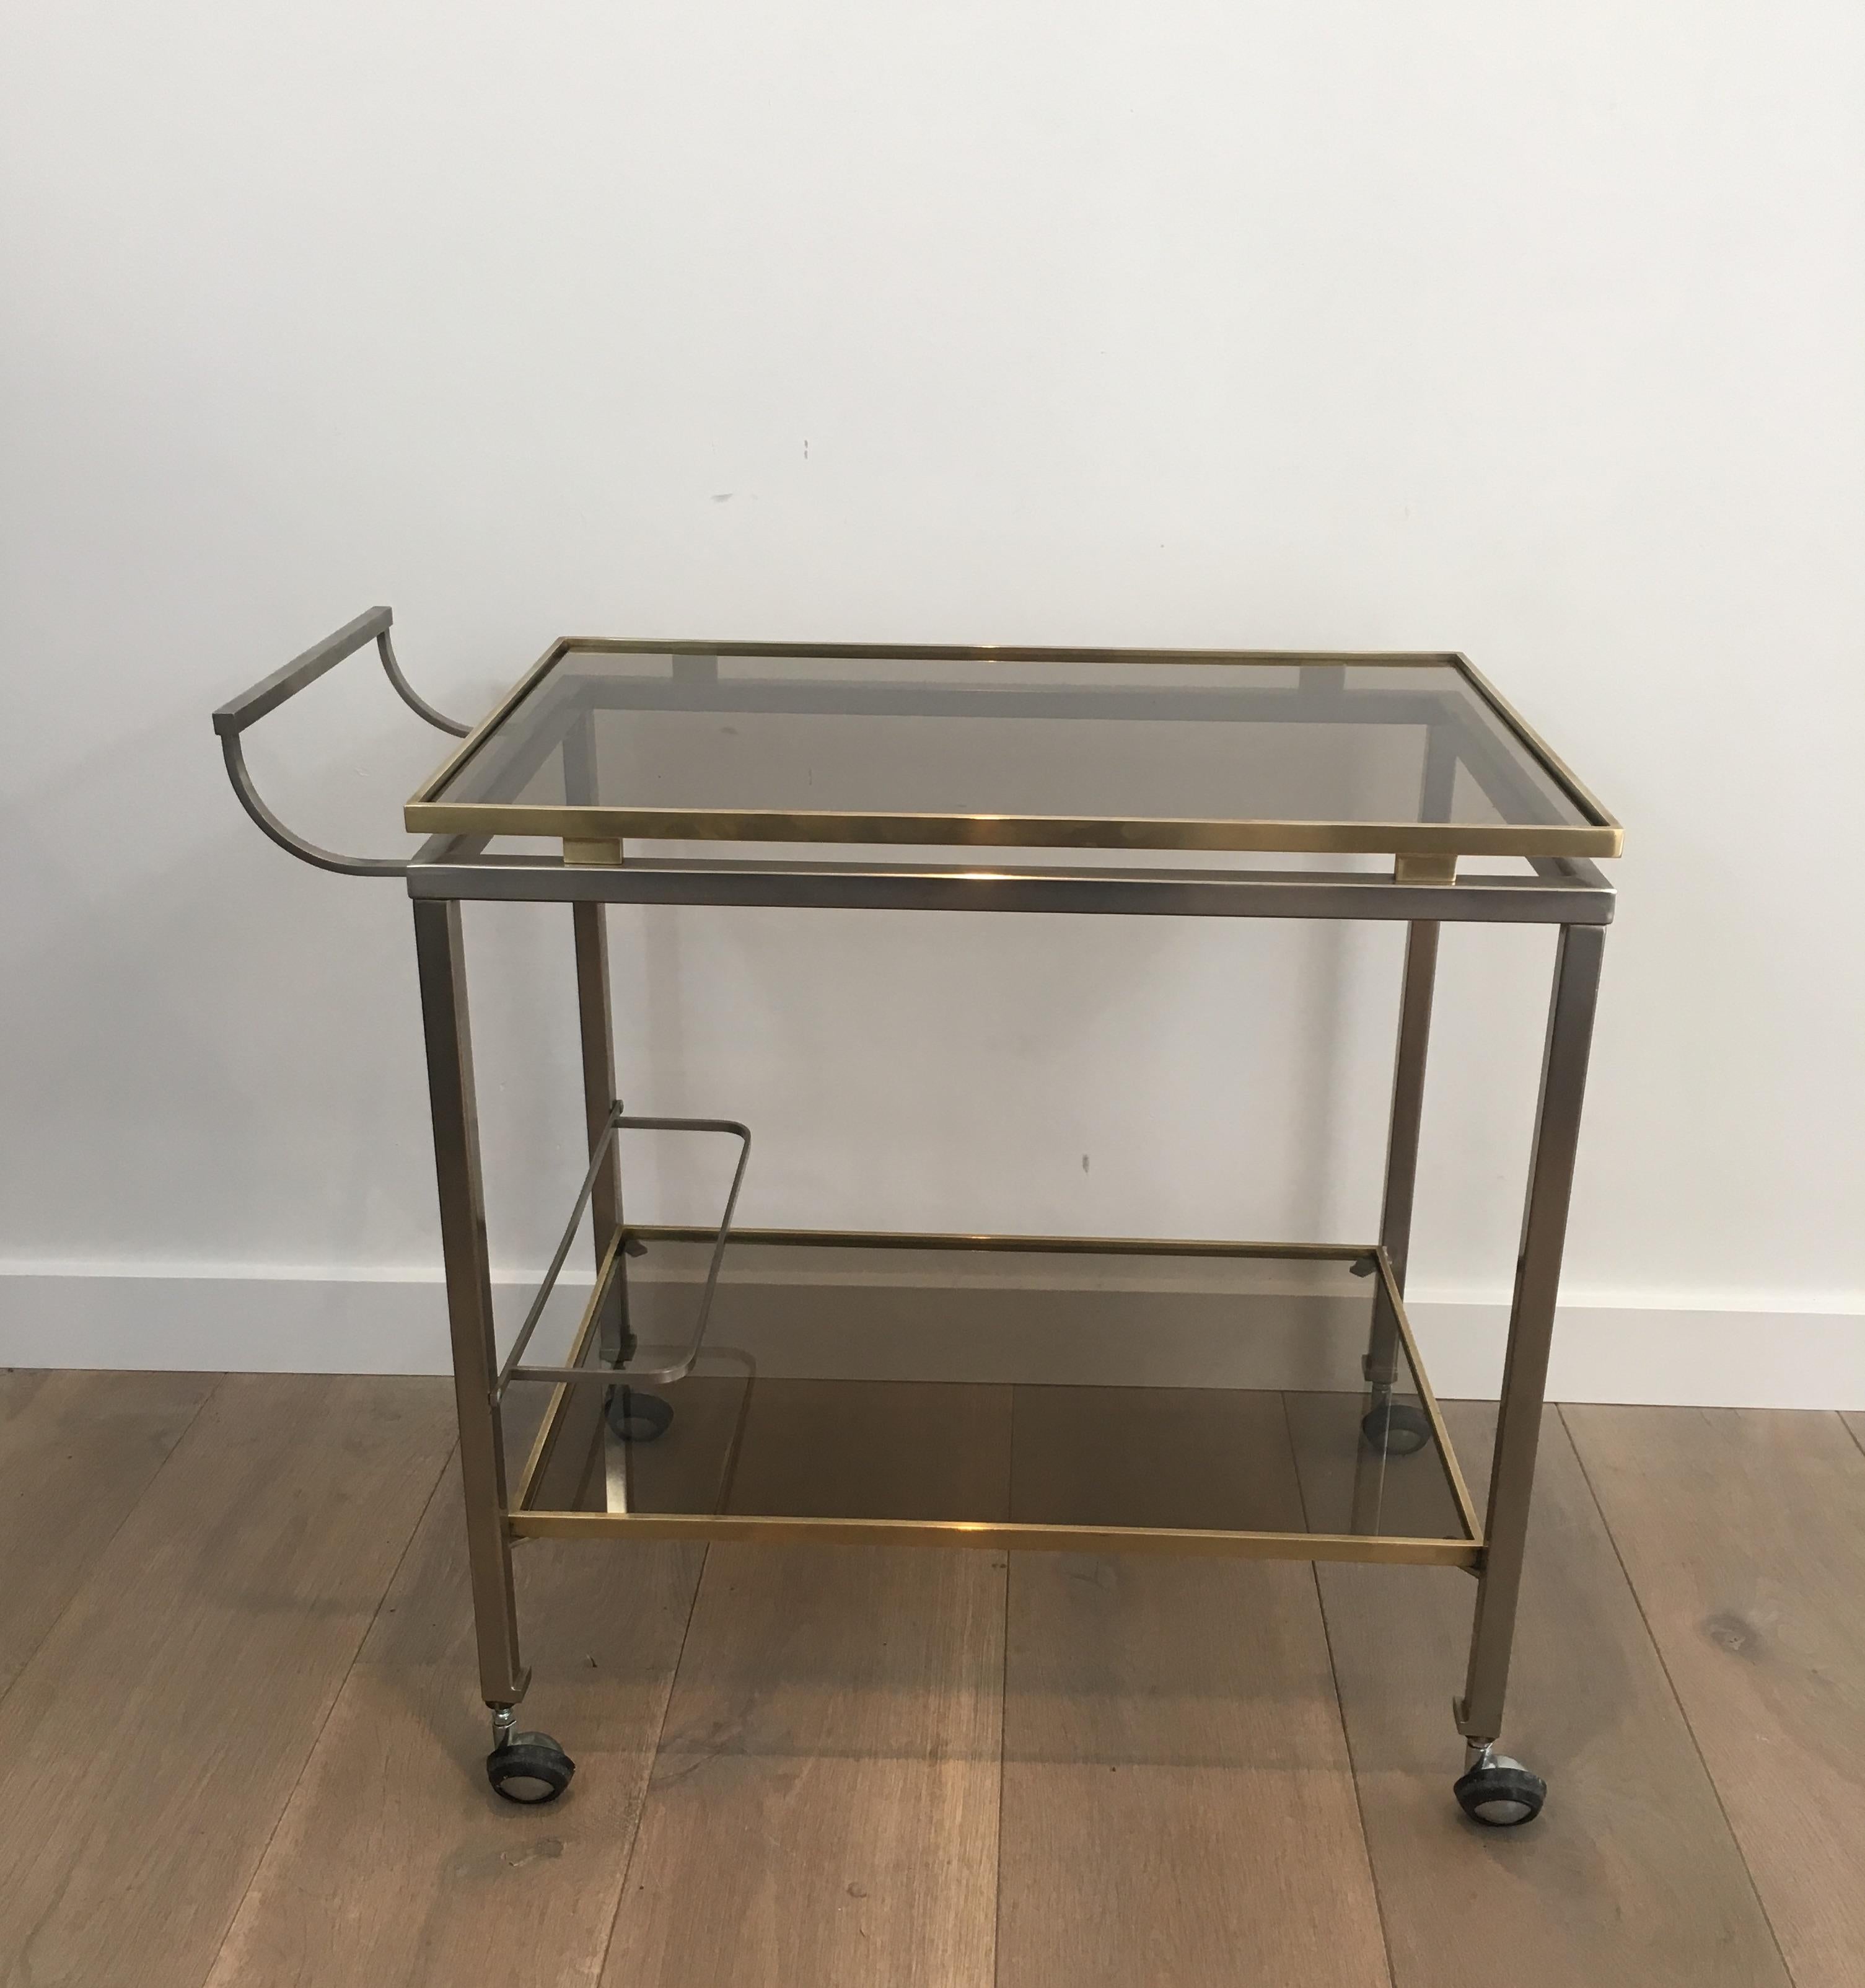 This brass trolley is made of brushed steel and brass with smoked glass shelves. This drinks trolley is a rare model by famous French designer Guy Lefèvre for Maison Jansen, circa 1970.